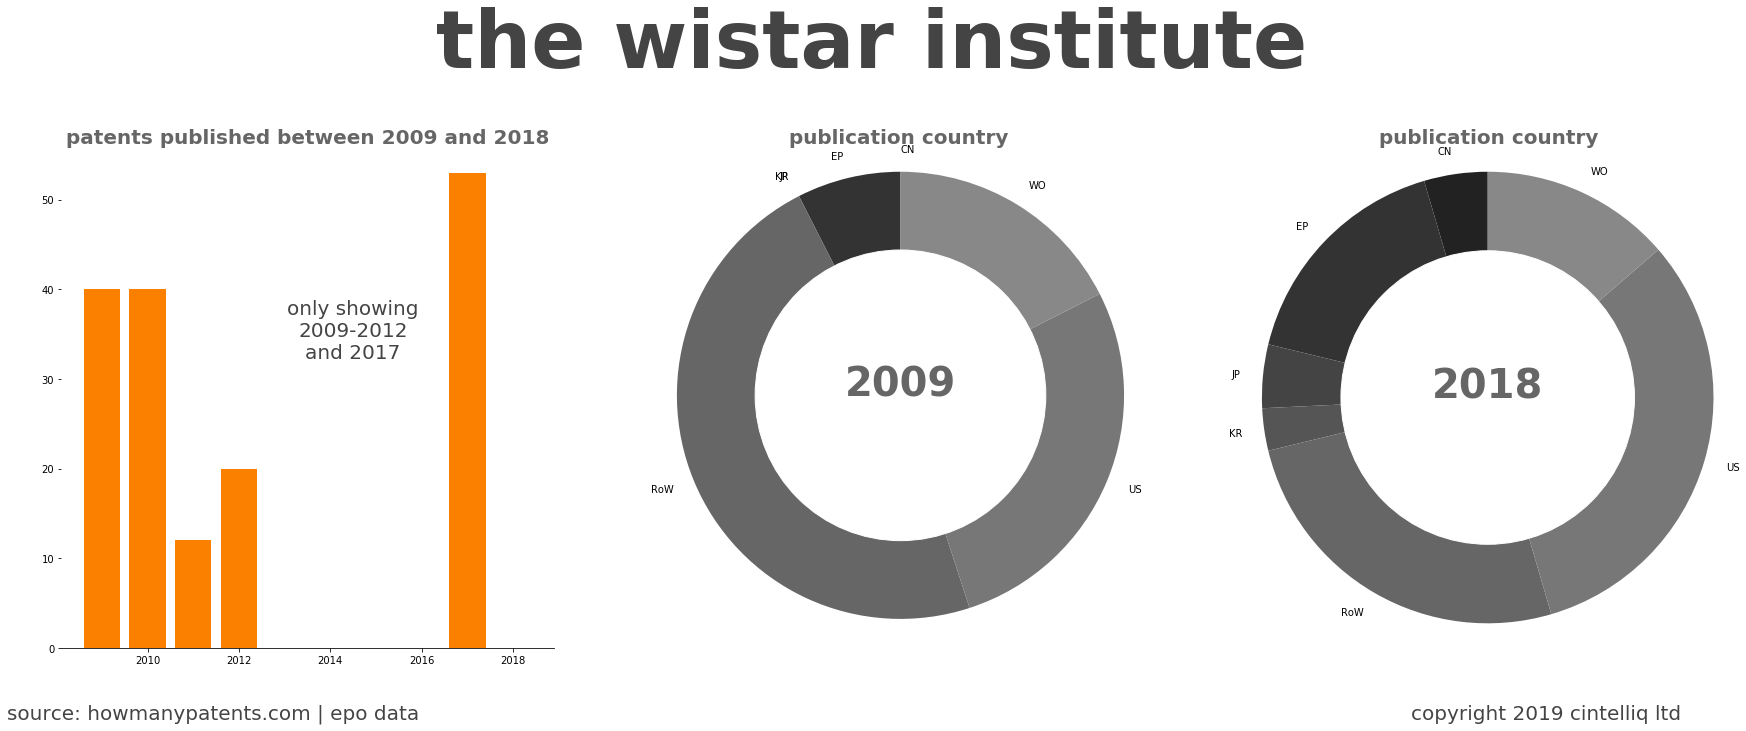 summary of patents for The Wistar Institute